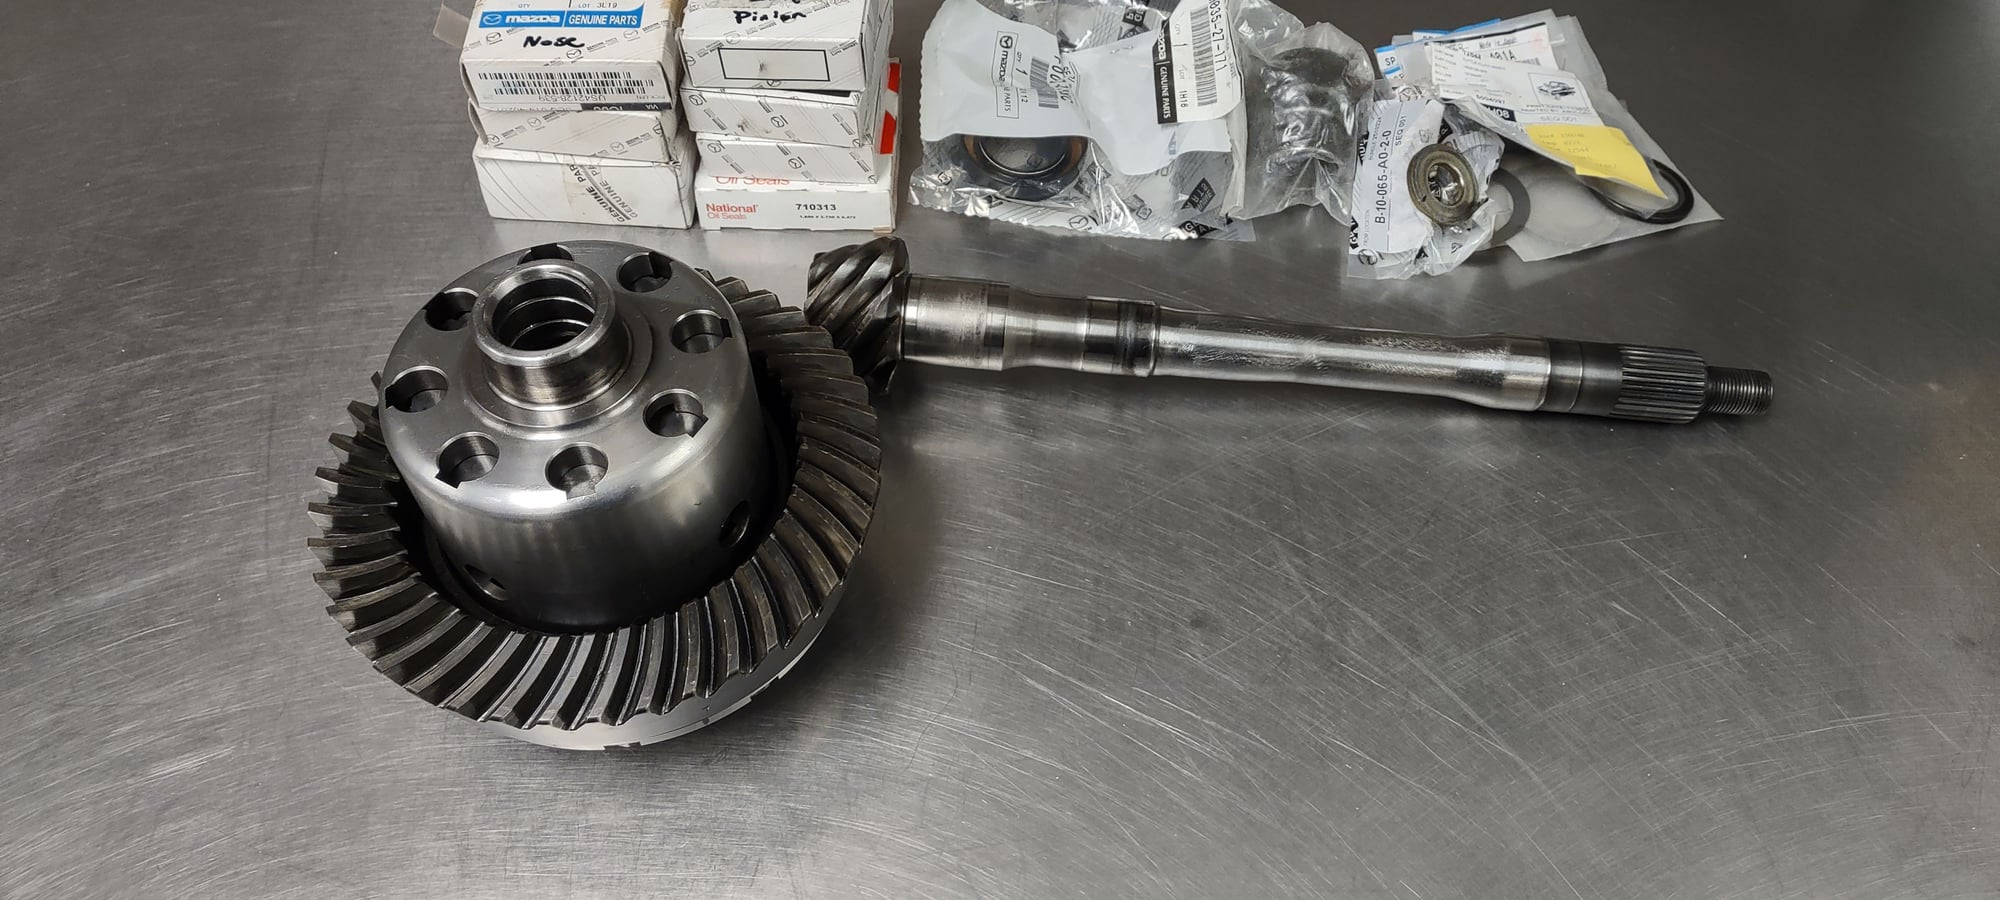 Drivetrain - Rx7 Fc 5.12 Ring & Pinion with Kaaz Differential - Used - 1986 to 1991 Mazda RX-7 - Hayward, CA 94544, United States